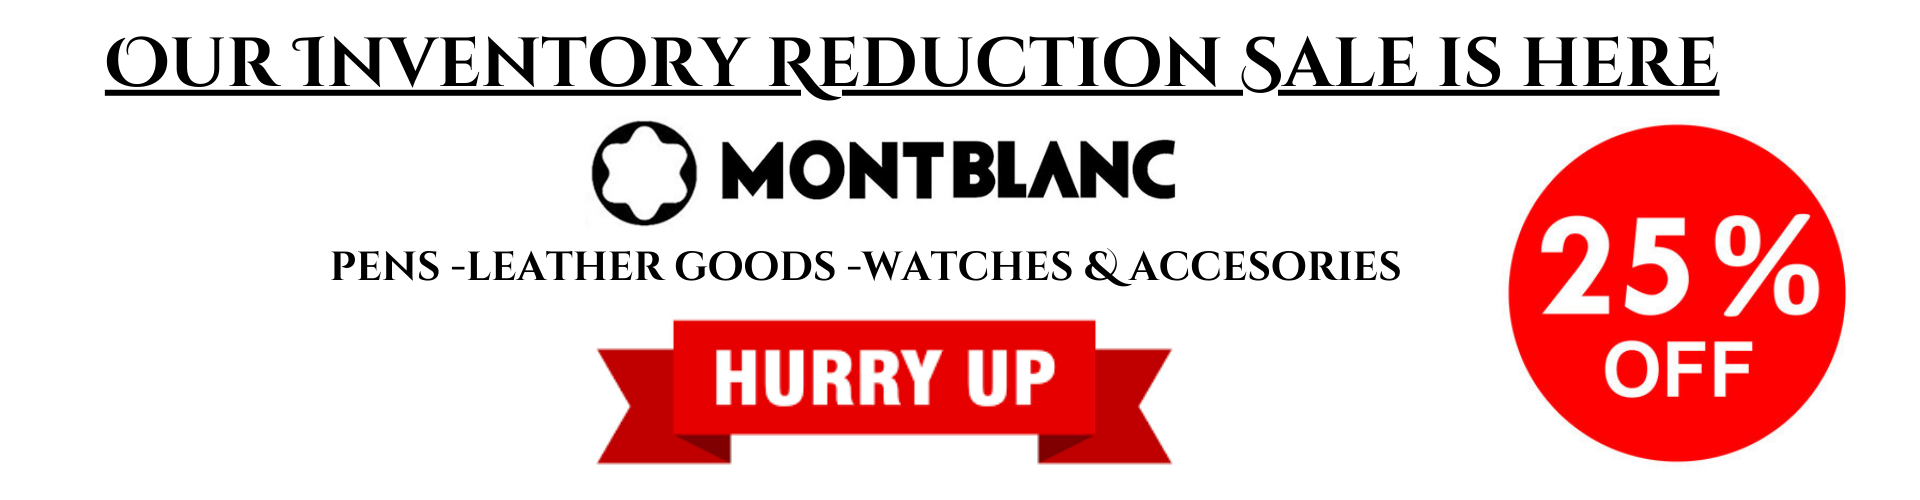 MONTBLANC INVENTORY  SALE 25% OFF